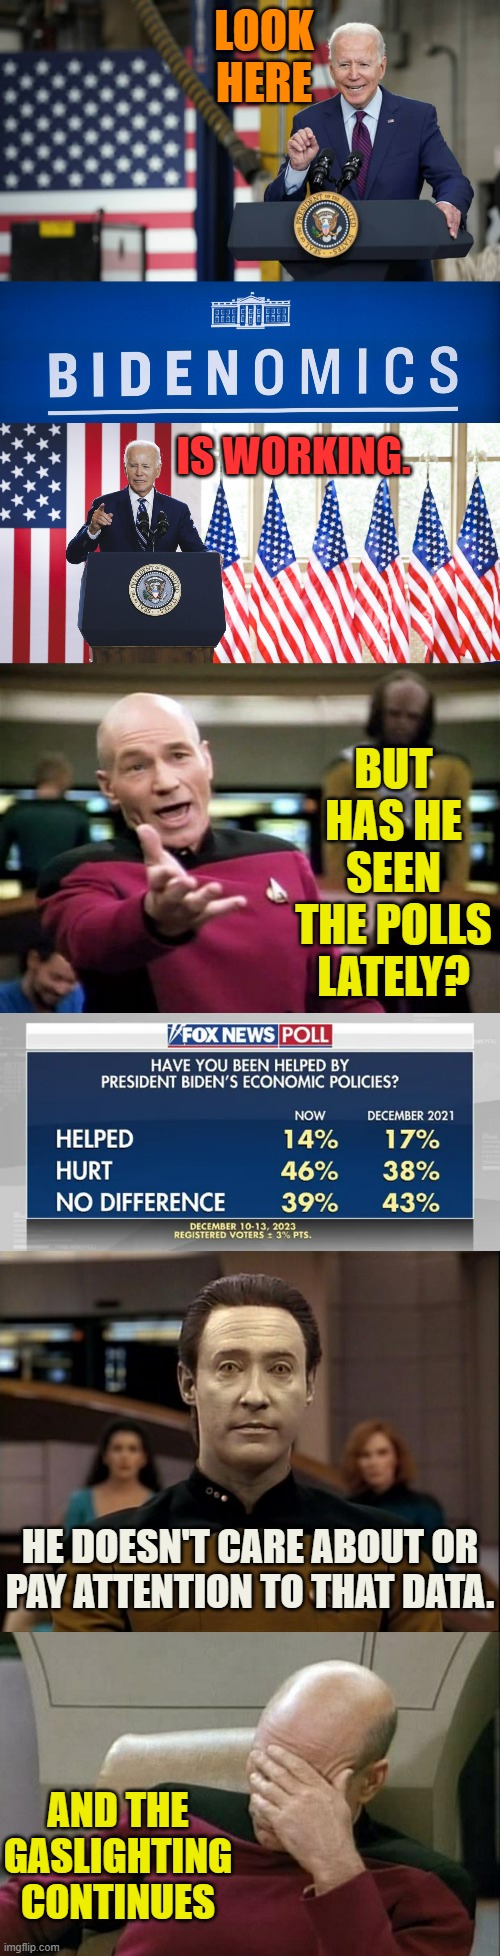 What Else Would You Expect? But...And The Gaslighting Continues | LOOK HERE; IS WORKING. BUT HAS HE SEEN THE POLLS LATELY? HE DOESN'T CARE ABOUT OR PAY ATTENTION TO THAT DATA. AND THE GASLIGHTING CONTINUES | image tagged in memes,captain picard facepalm,joe biden,economy,bidenomics,what are you talking about | made w/ Imgflip meme maker